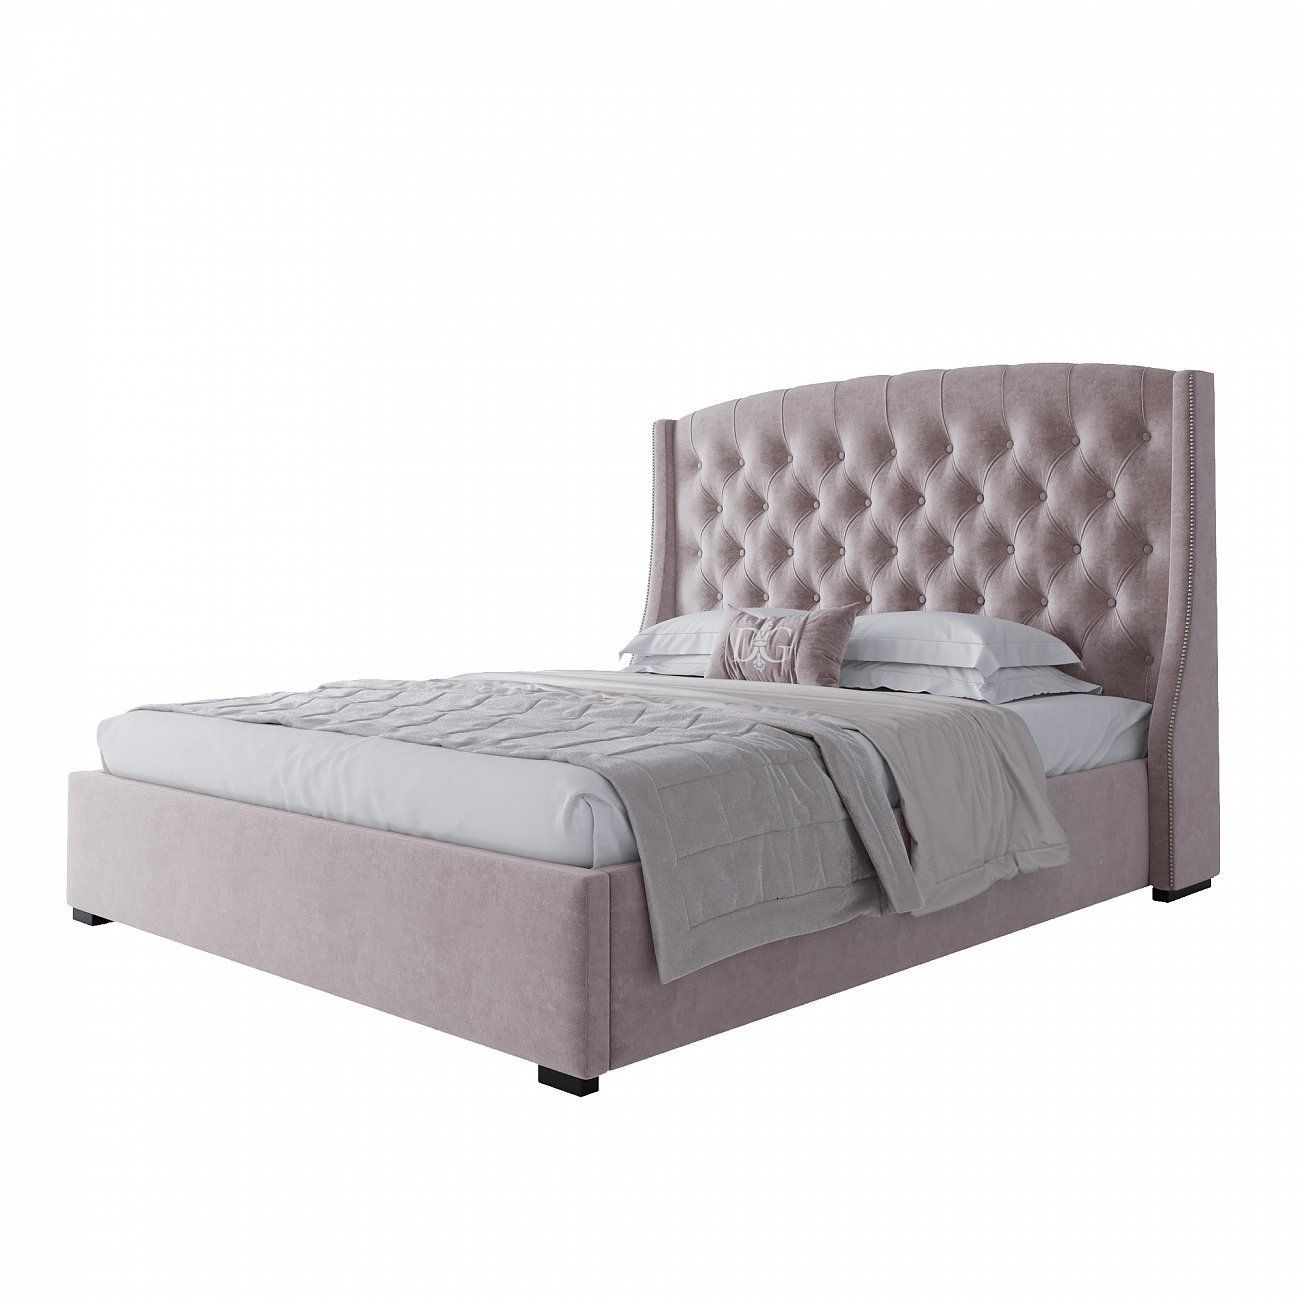 Double bed with upholstered headboard 160x200 cm dusty rose Hugo